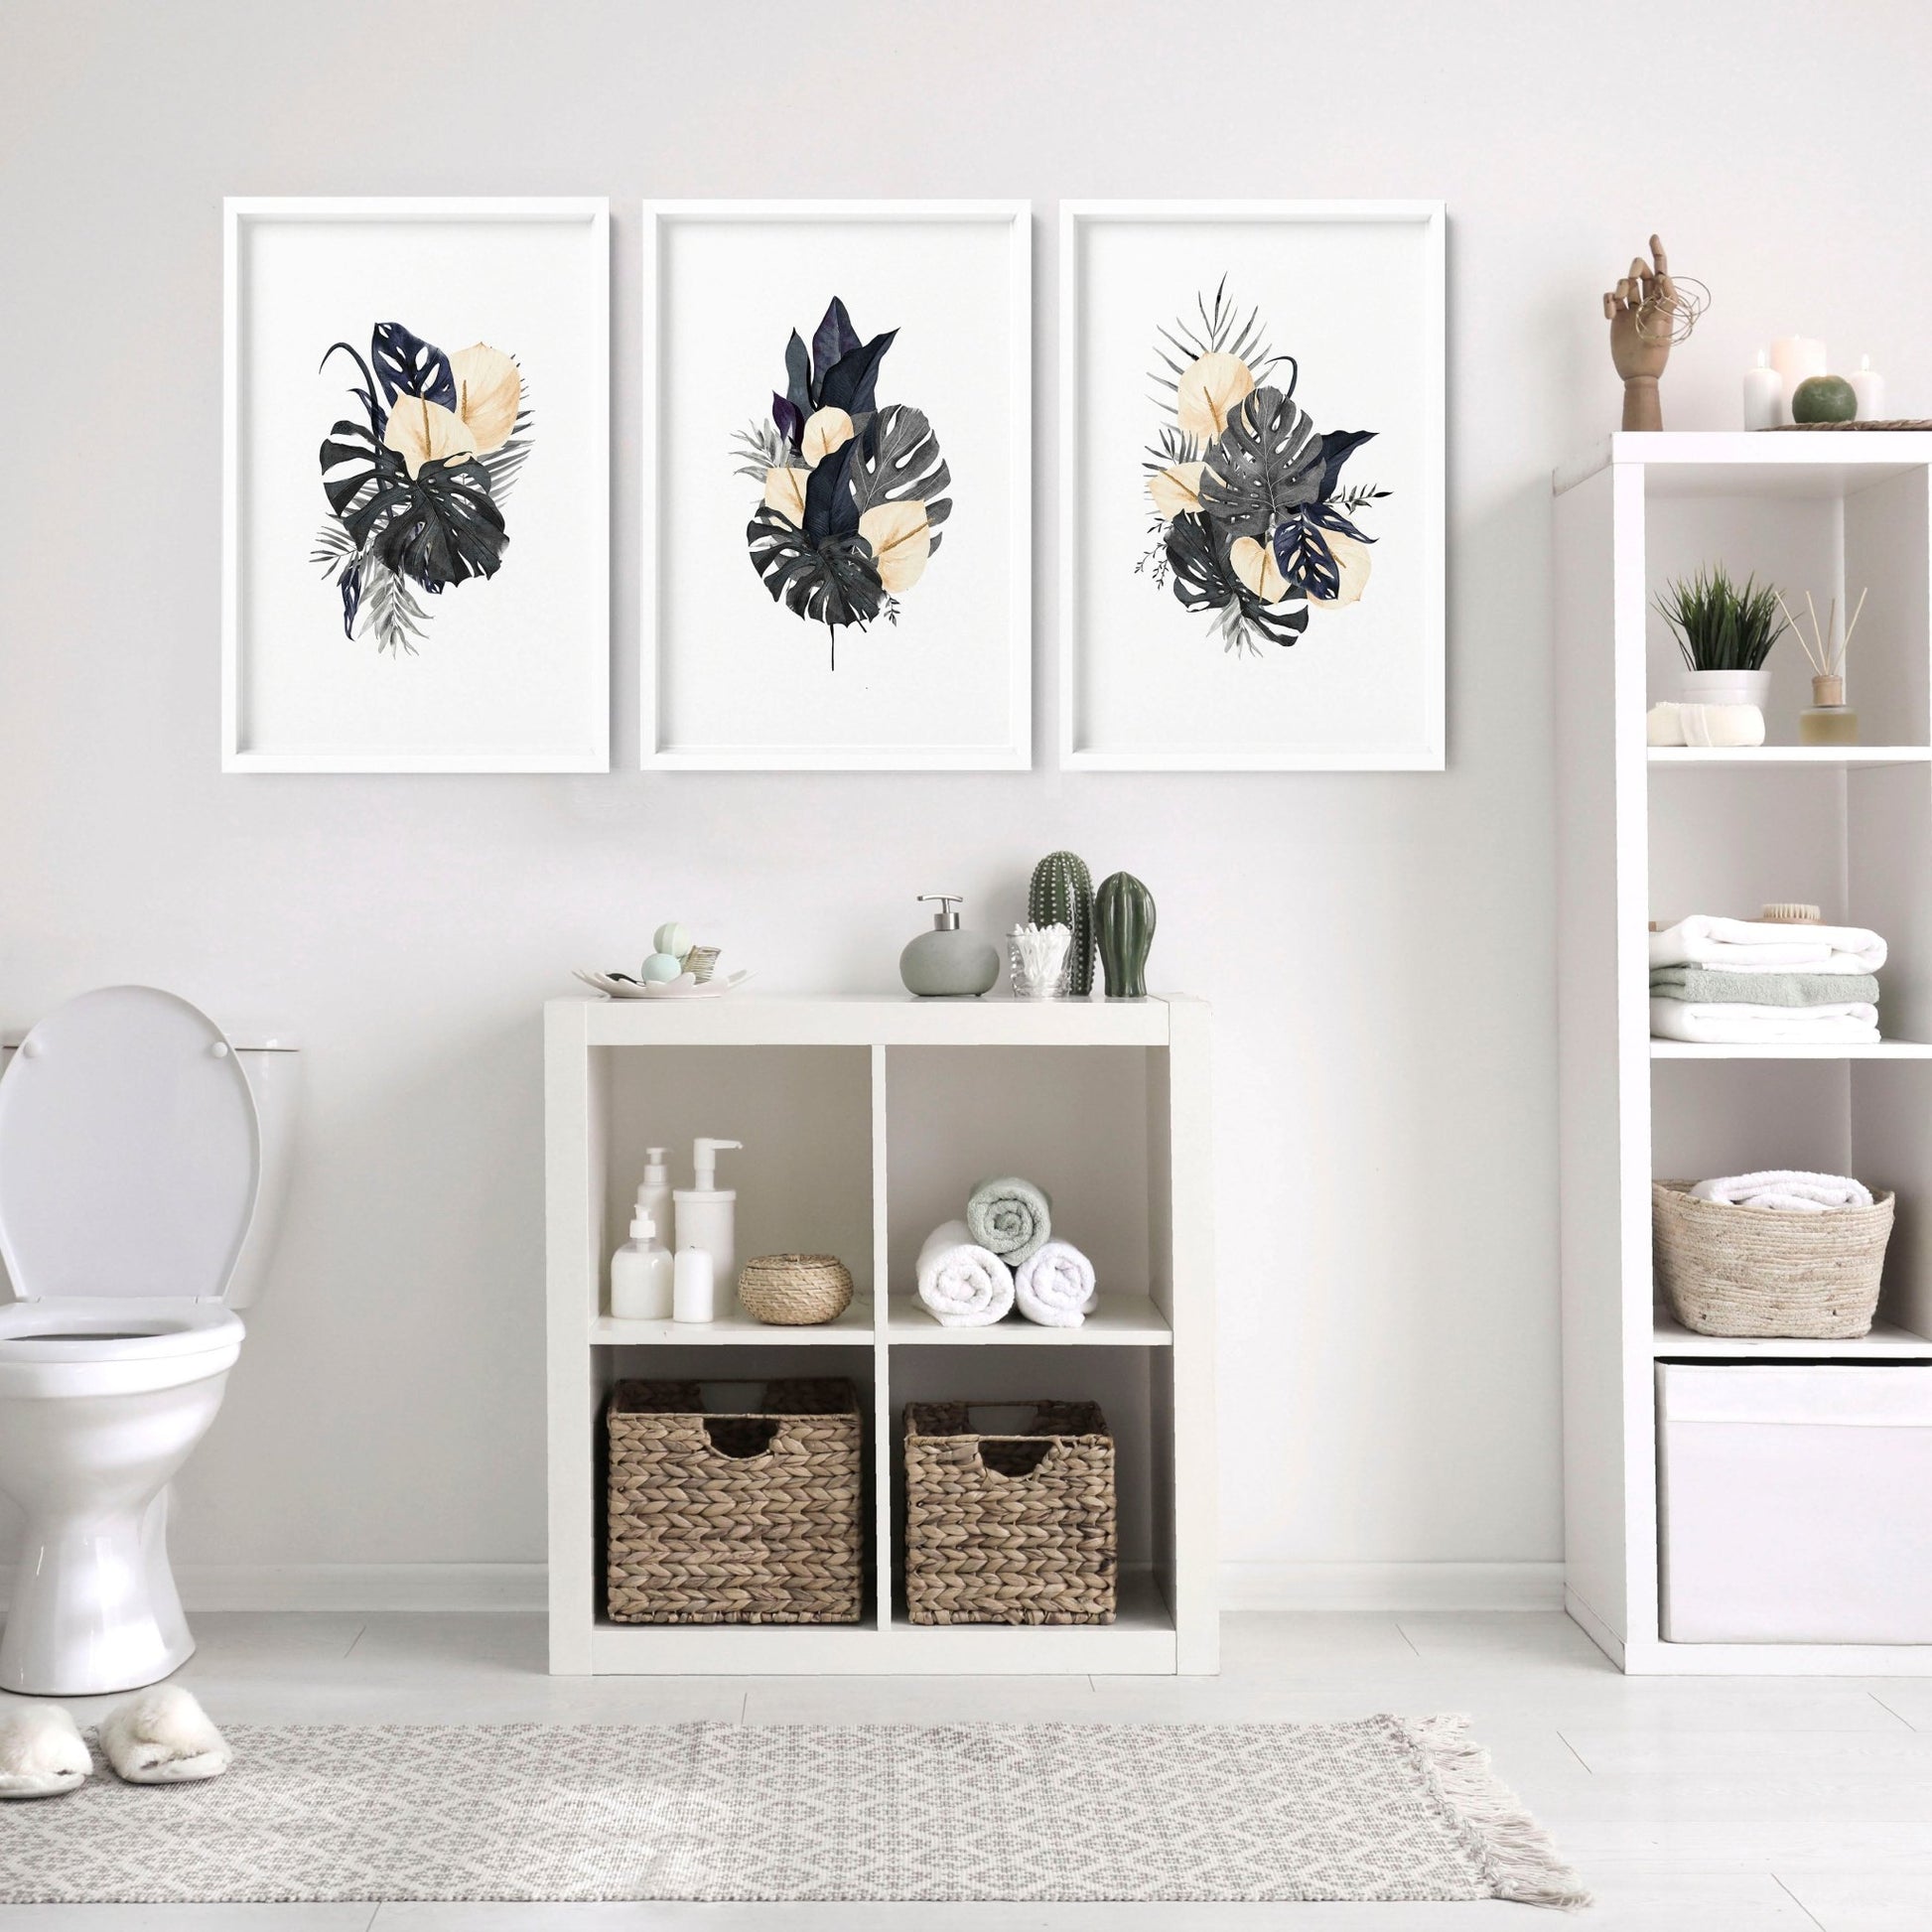 Framed pictures for the bathroom | set of 3 Tropical wall prints